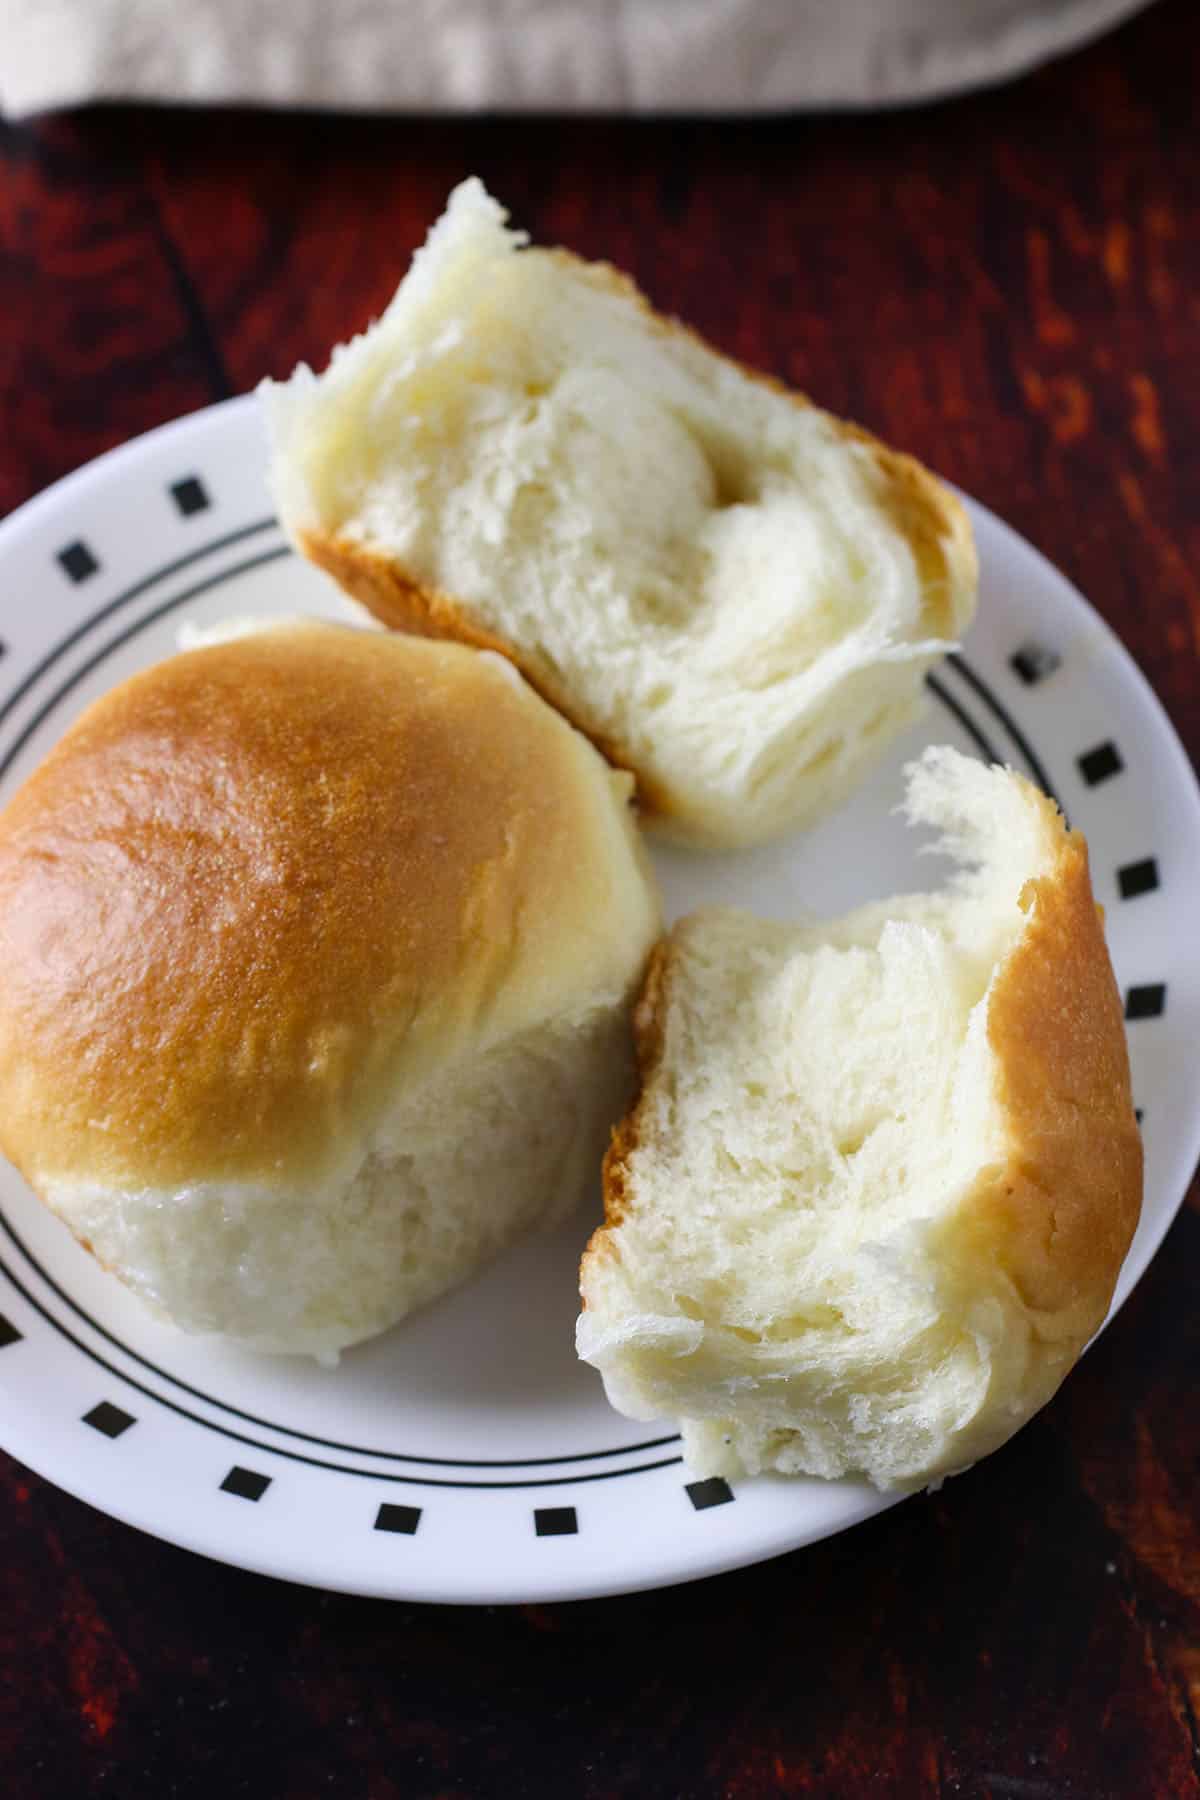 Coconut bread or pani popo on a small plate.